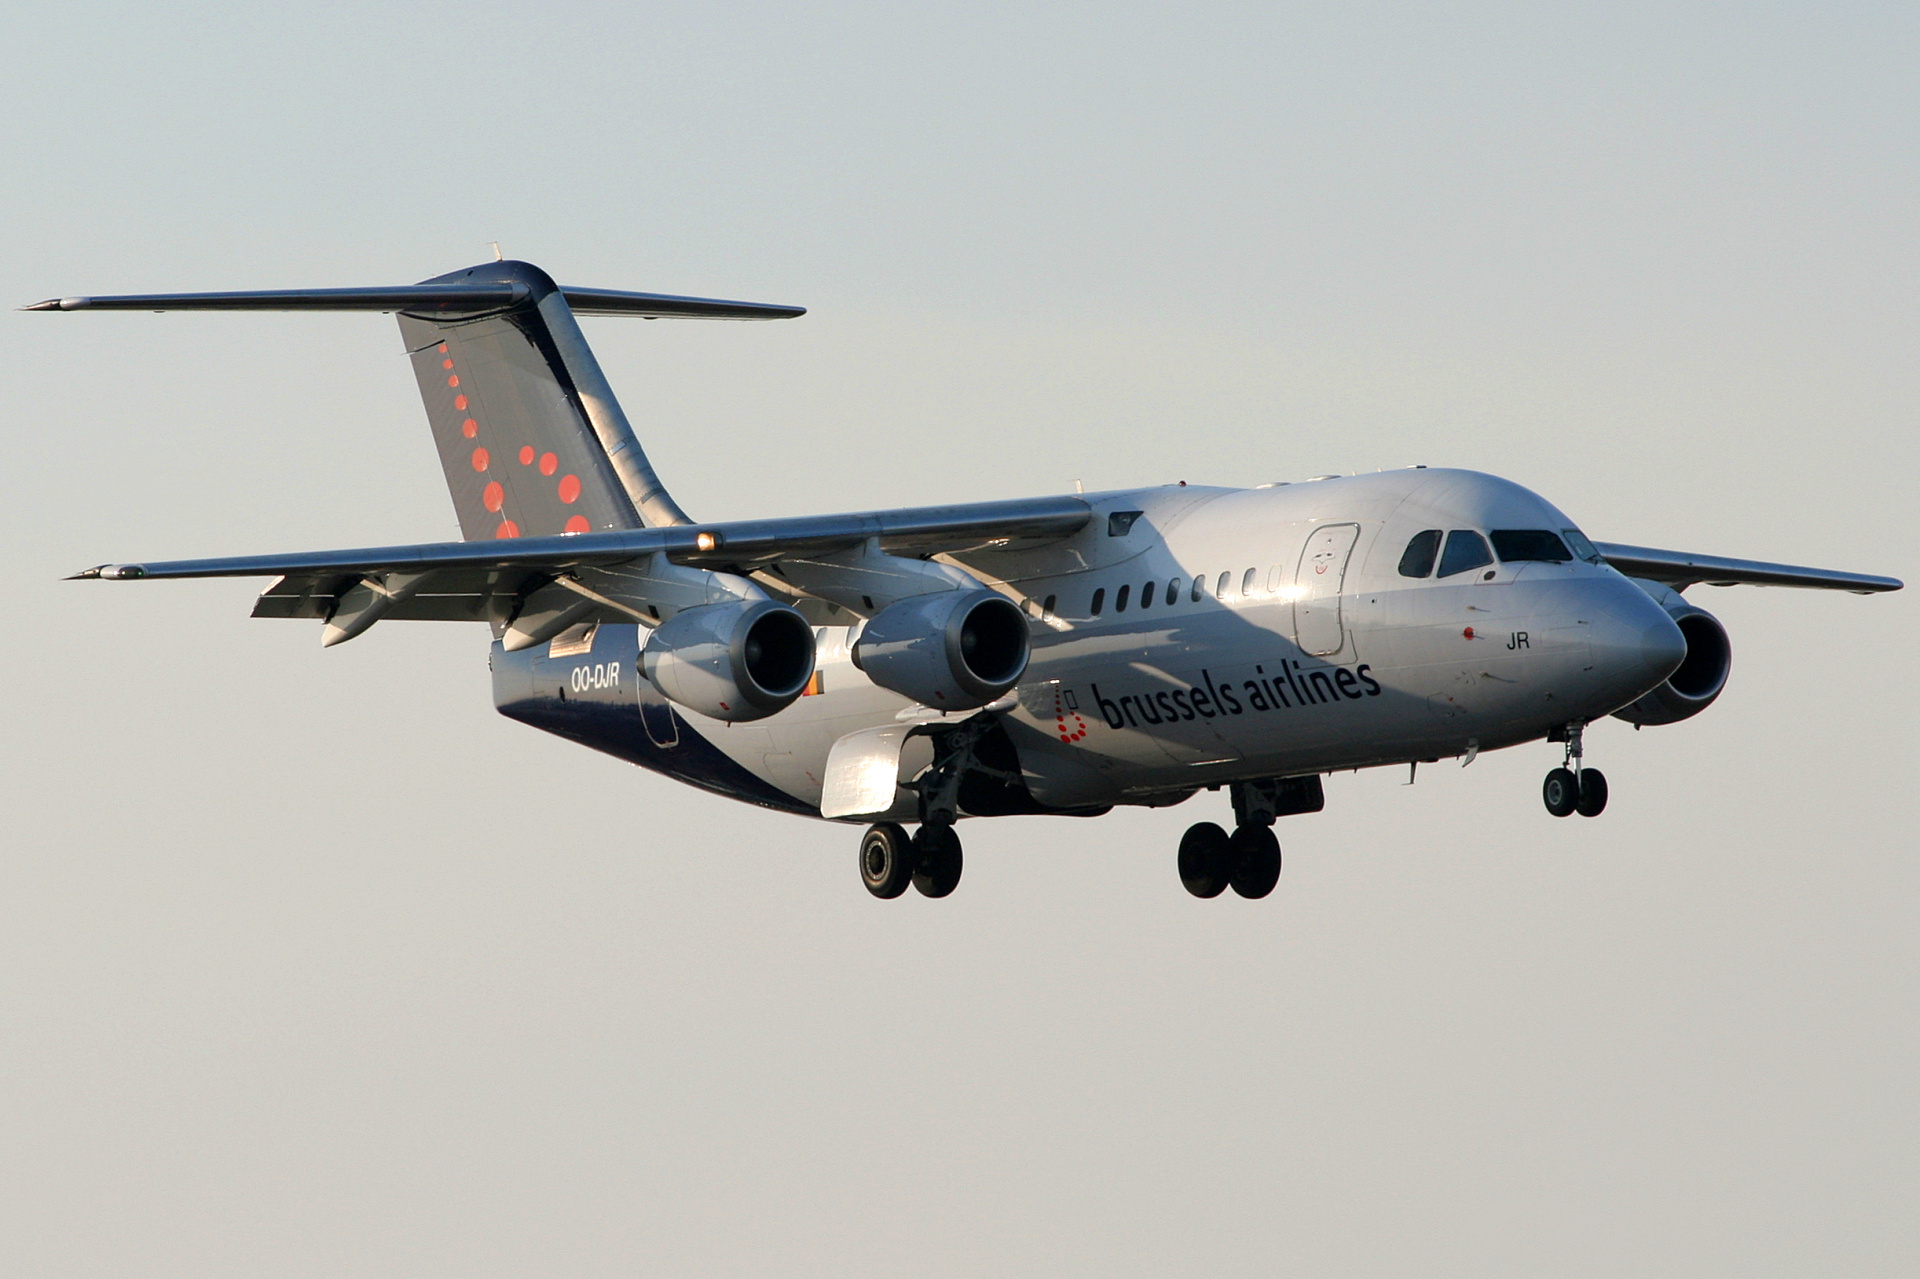 OO-DJR (Aircraft » EPWA Spotting » BAe 146 and revisions » Avro RJ85 » Brussels Airlines)